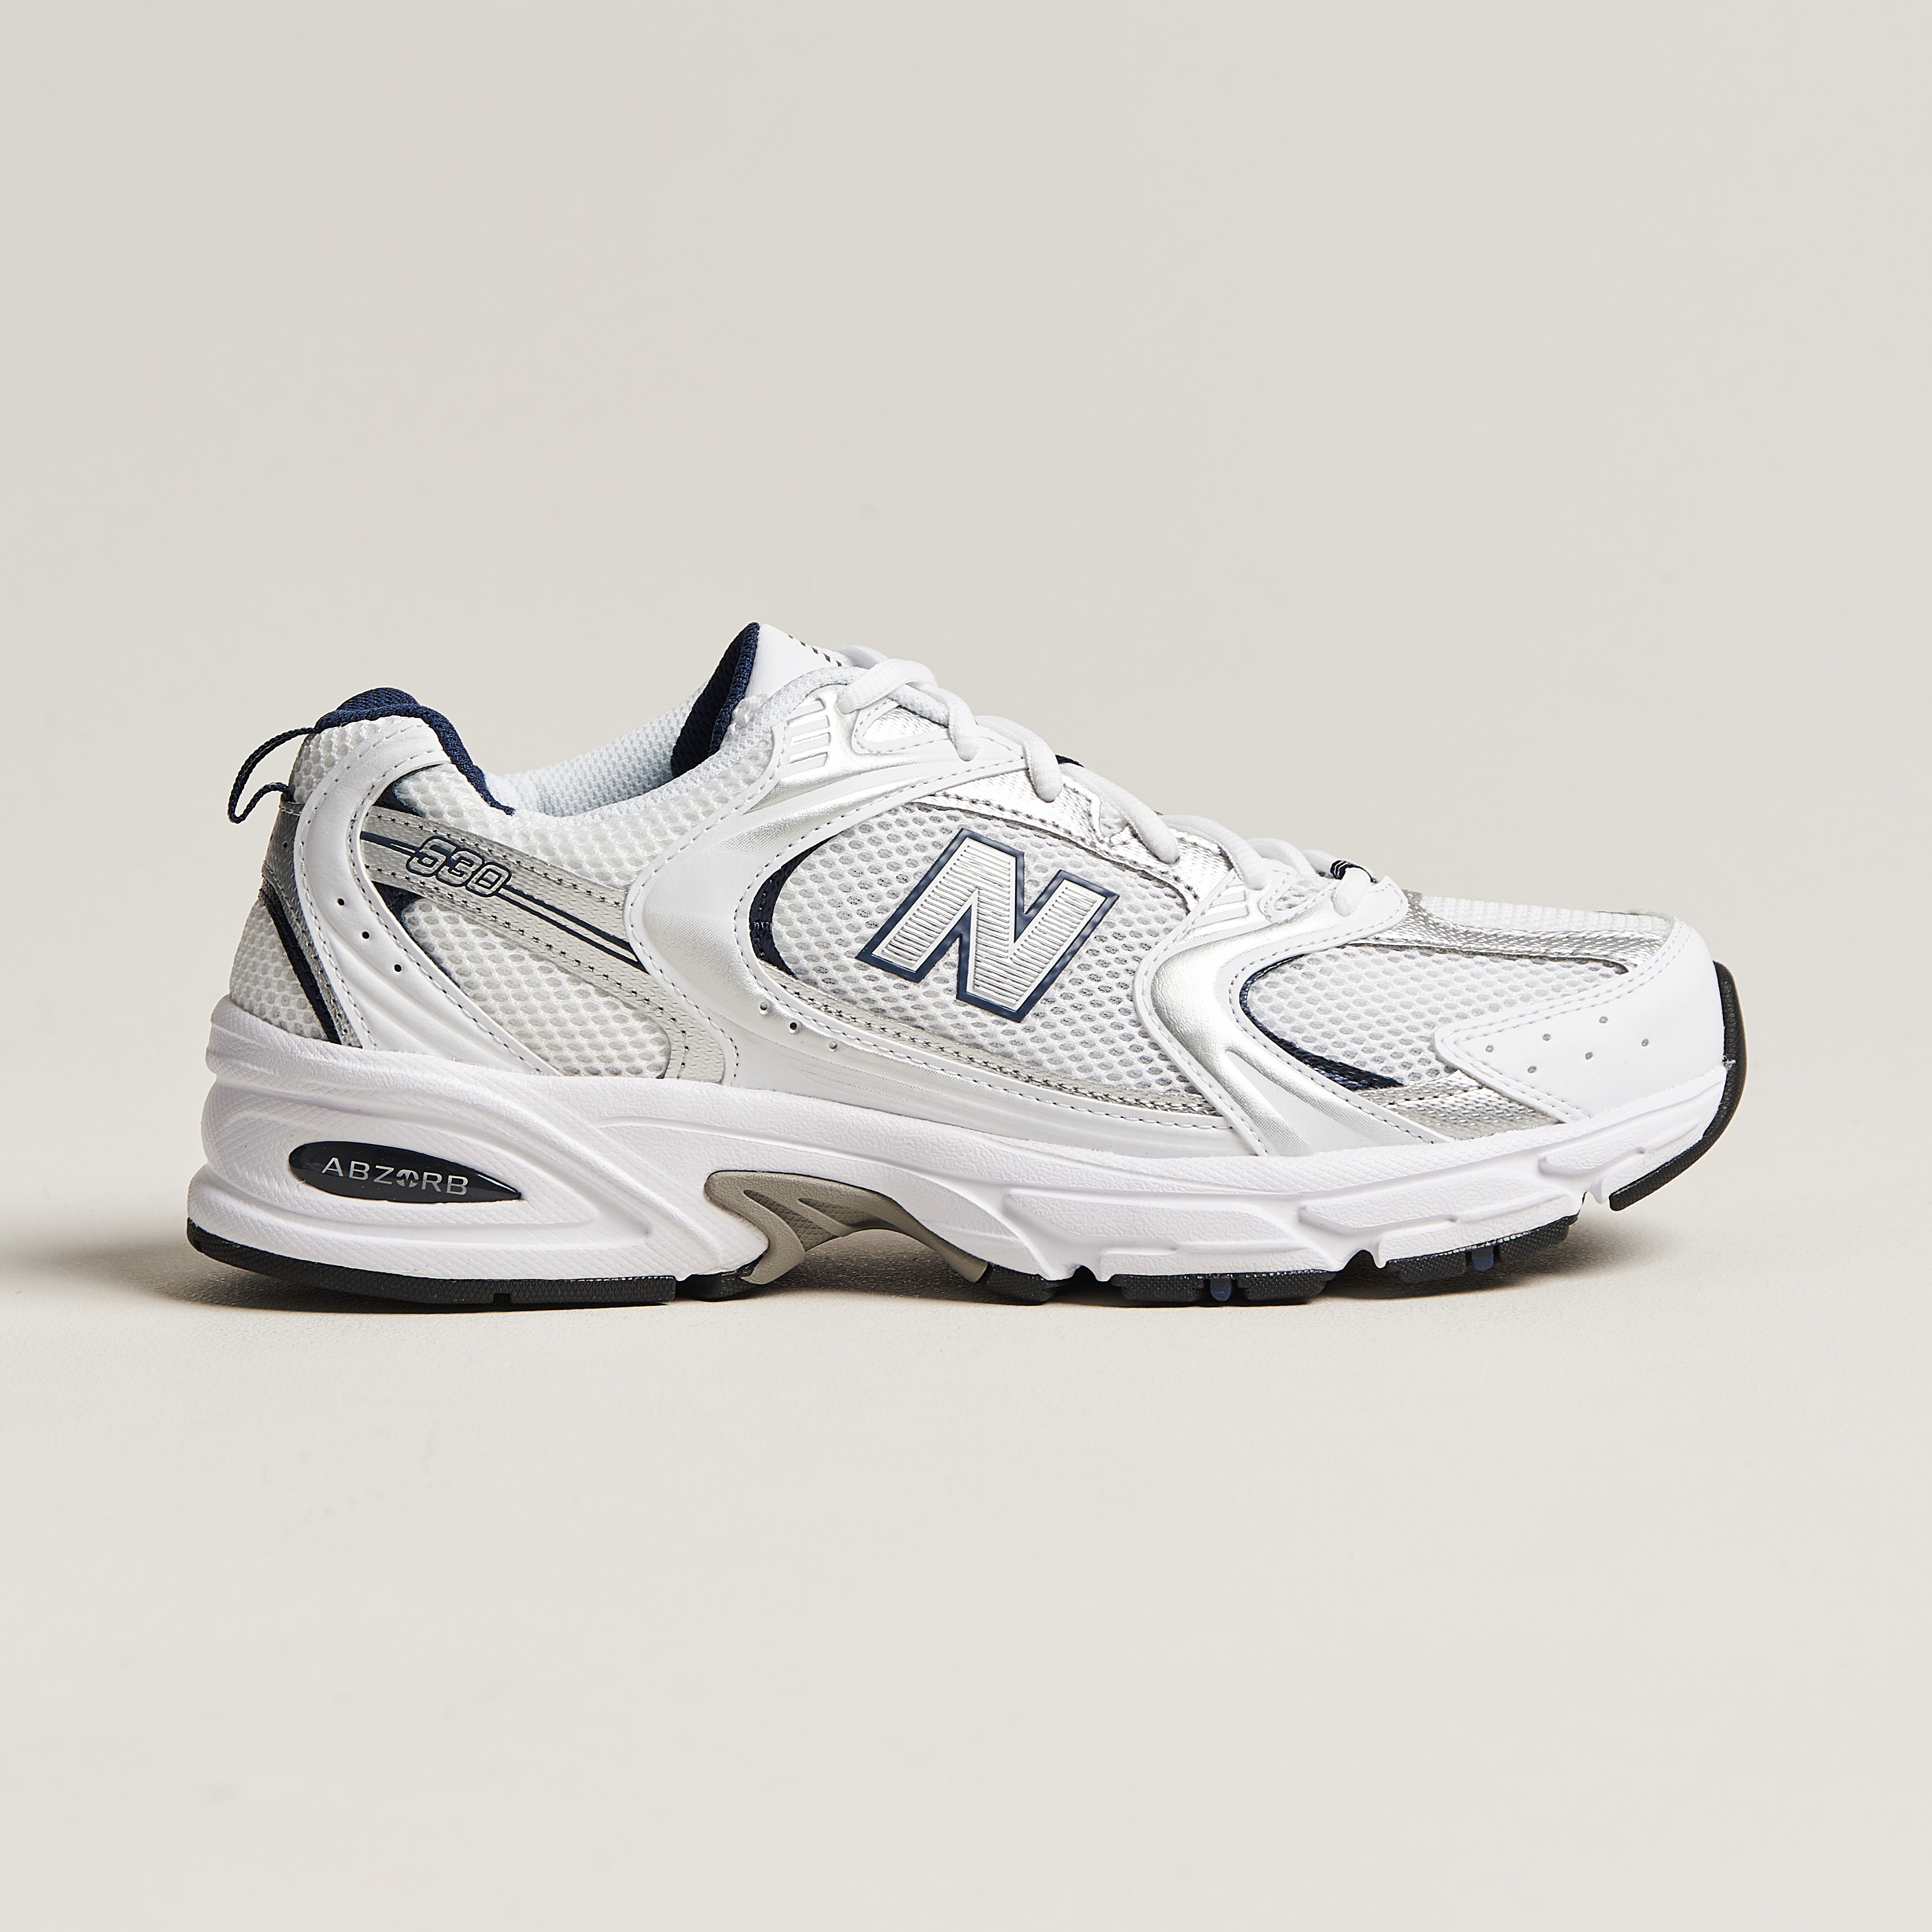 New Balance 530 Sneakers White at CareOfCarl.com